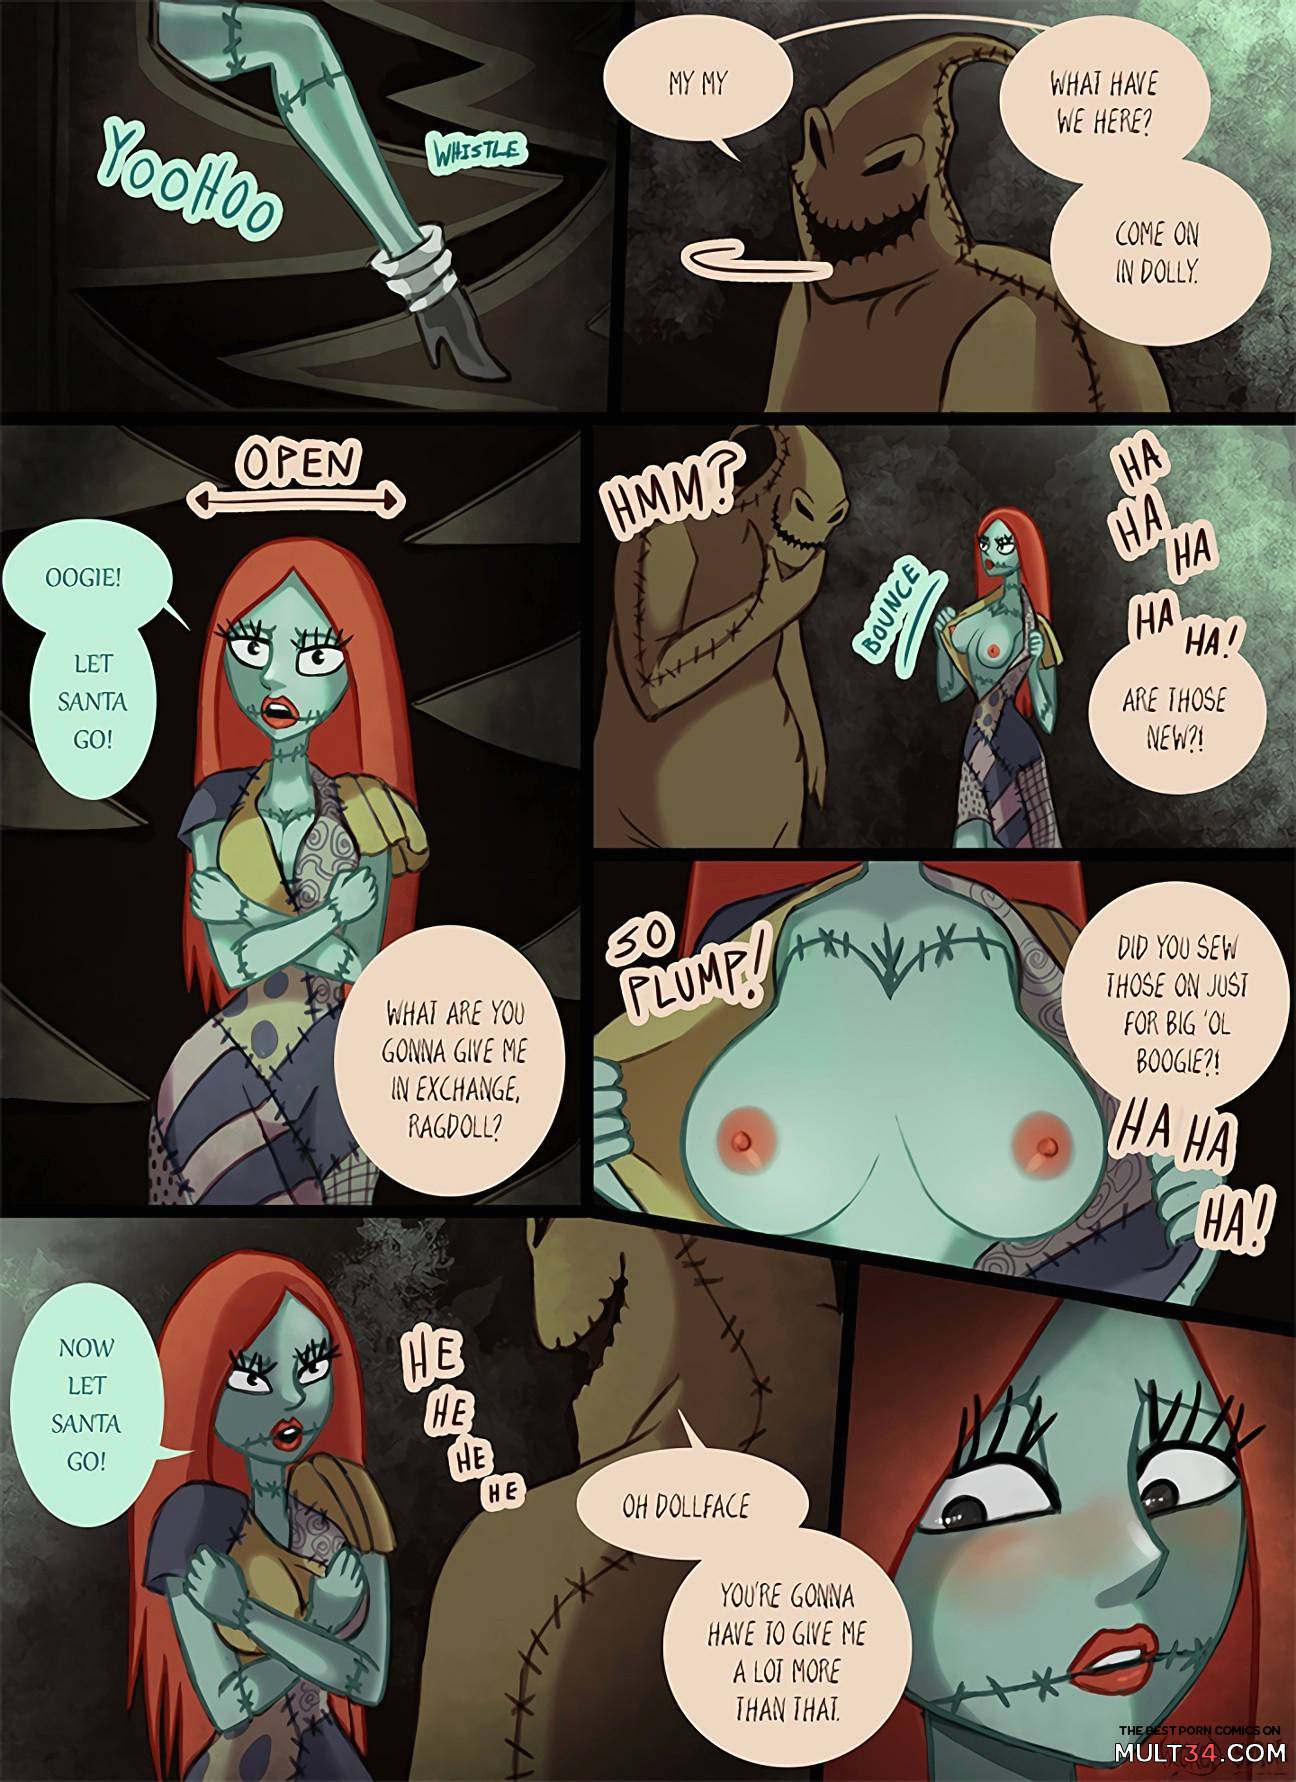 Sally x Oogie Boogie page 2